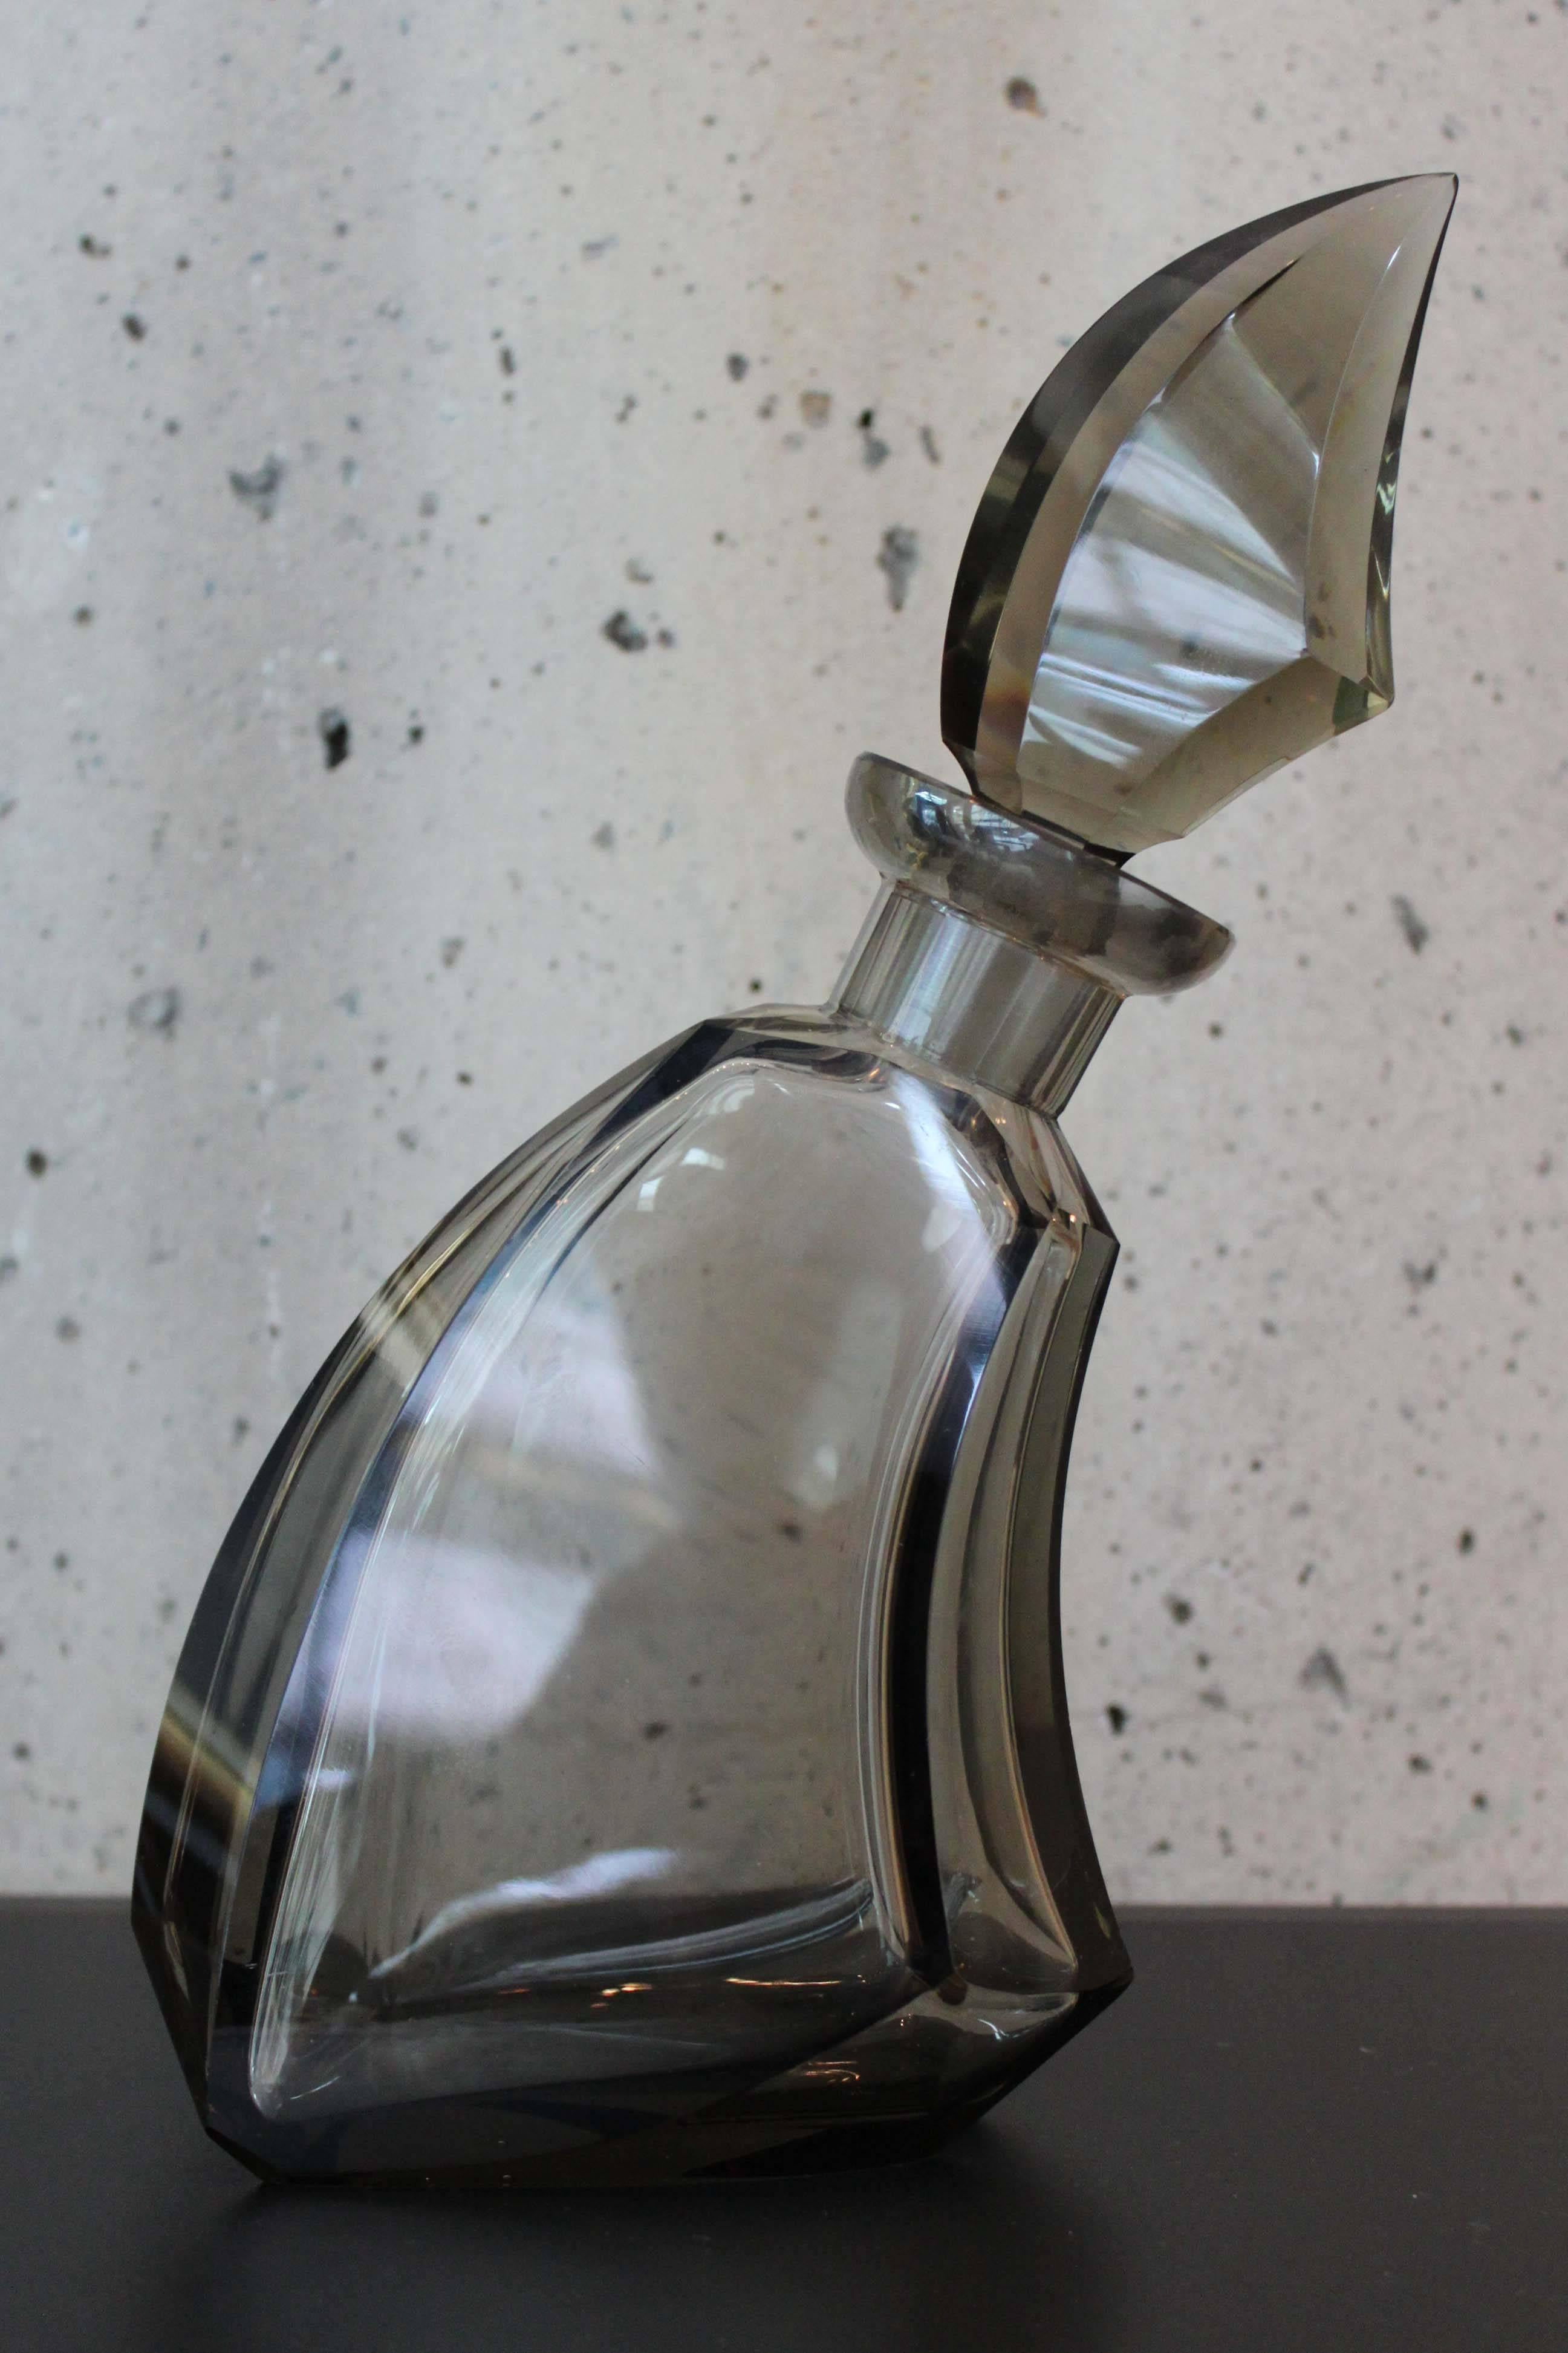 Smoked crystal decanter, circa 1970. Good overall condition with minor surface scratches/scuffs near base, consistent with age and use.